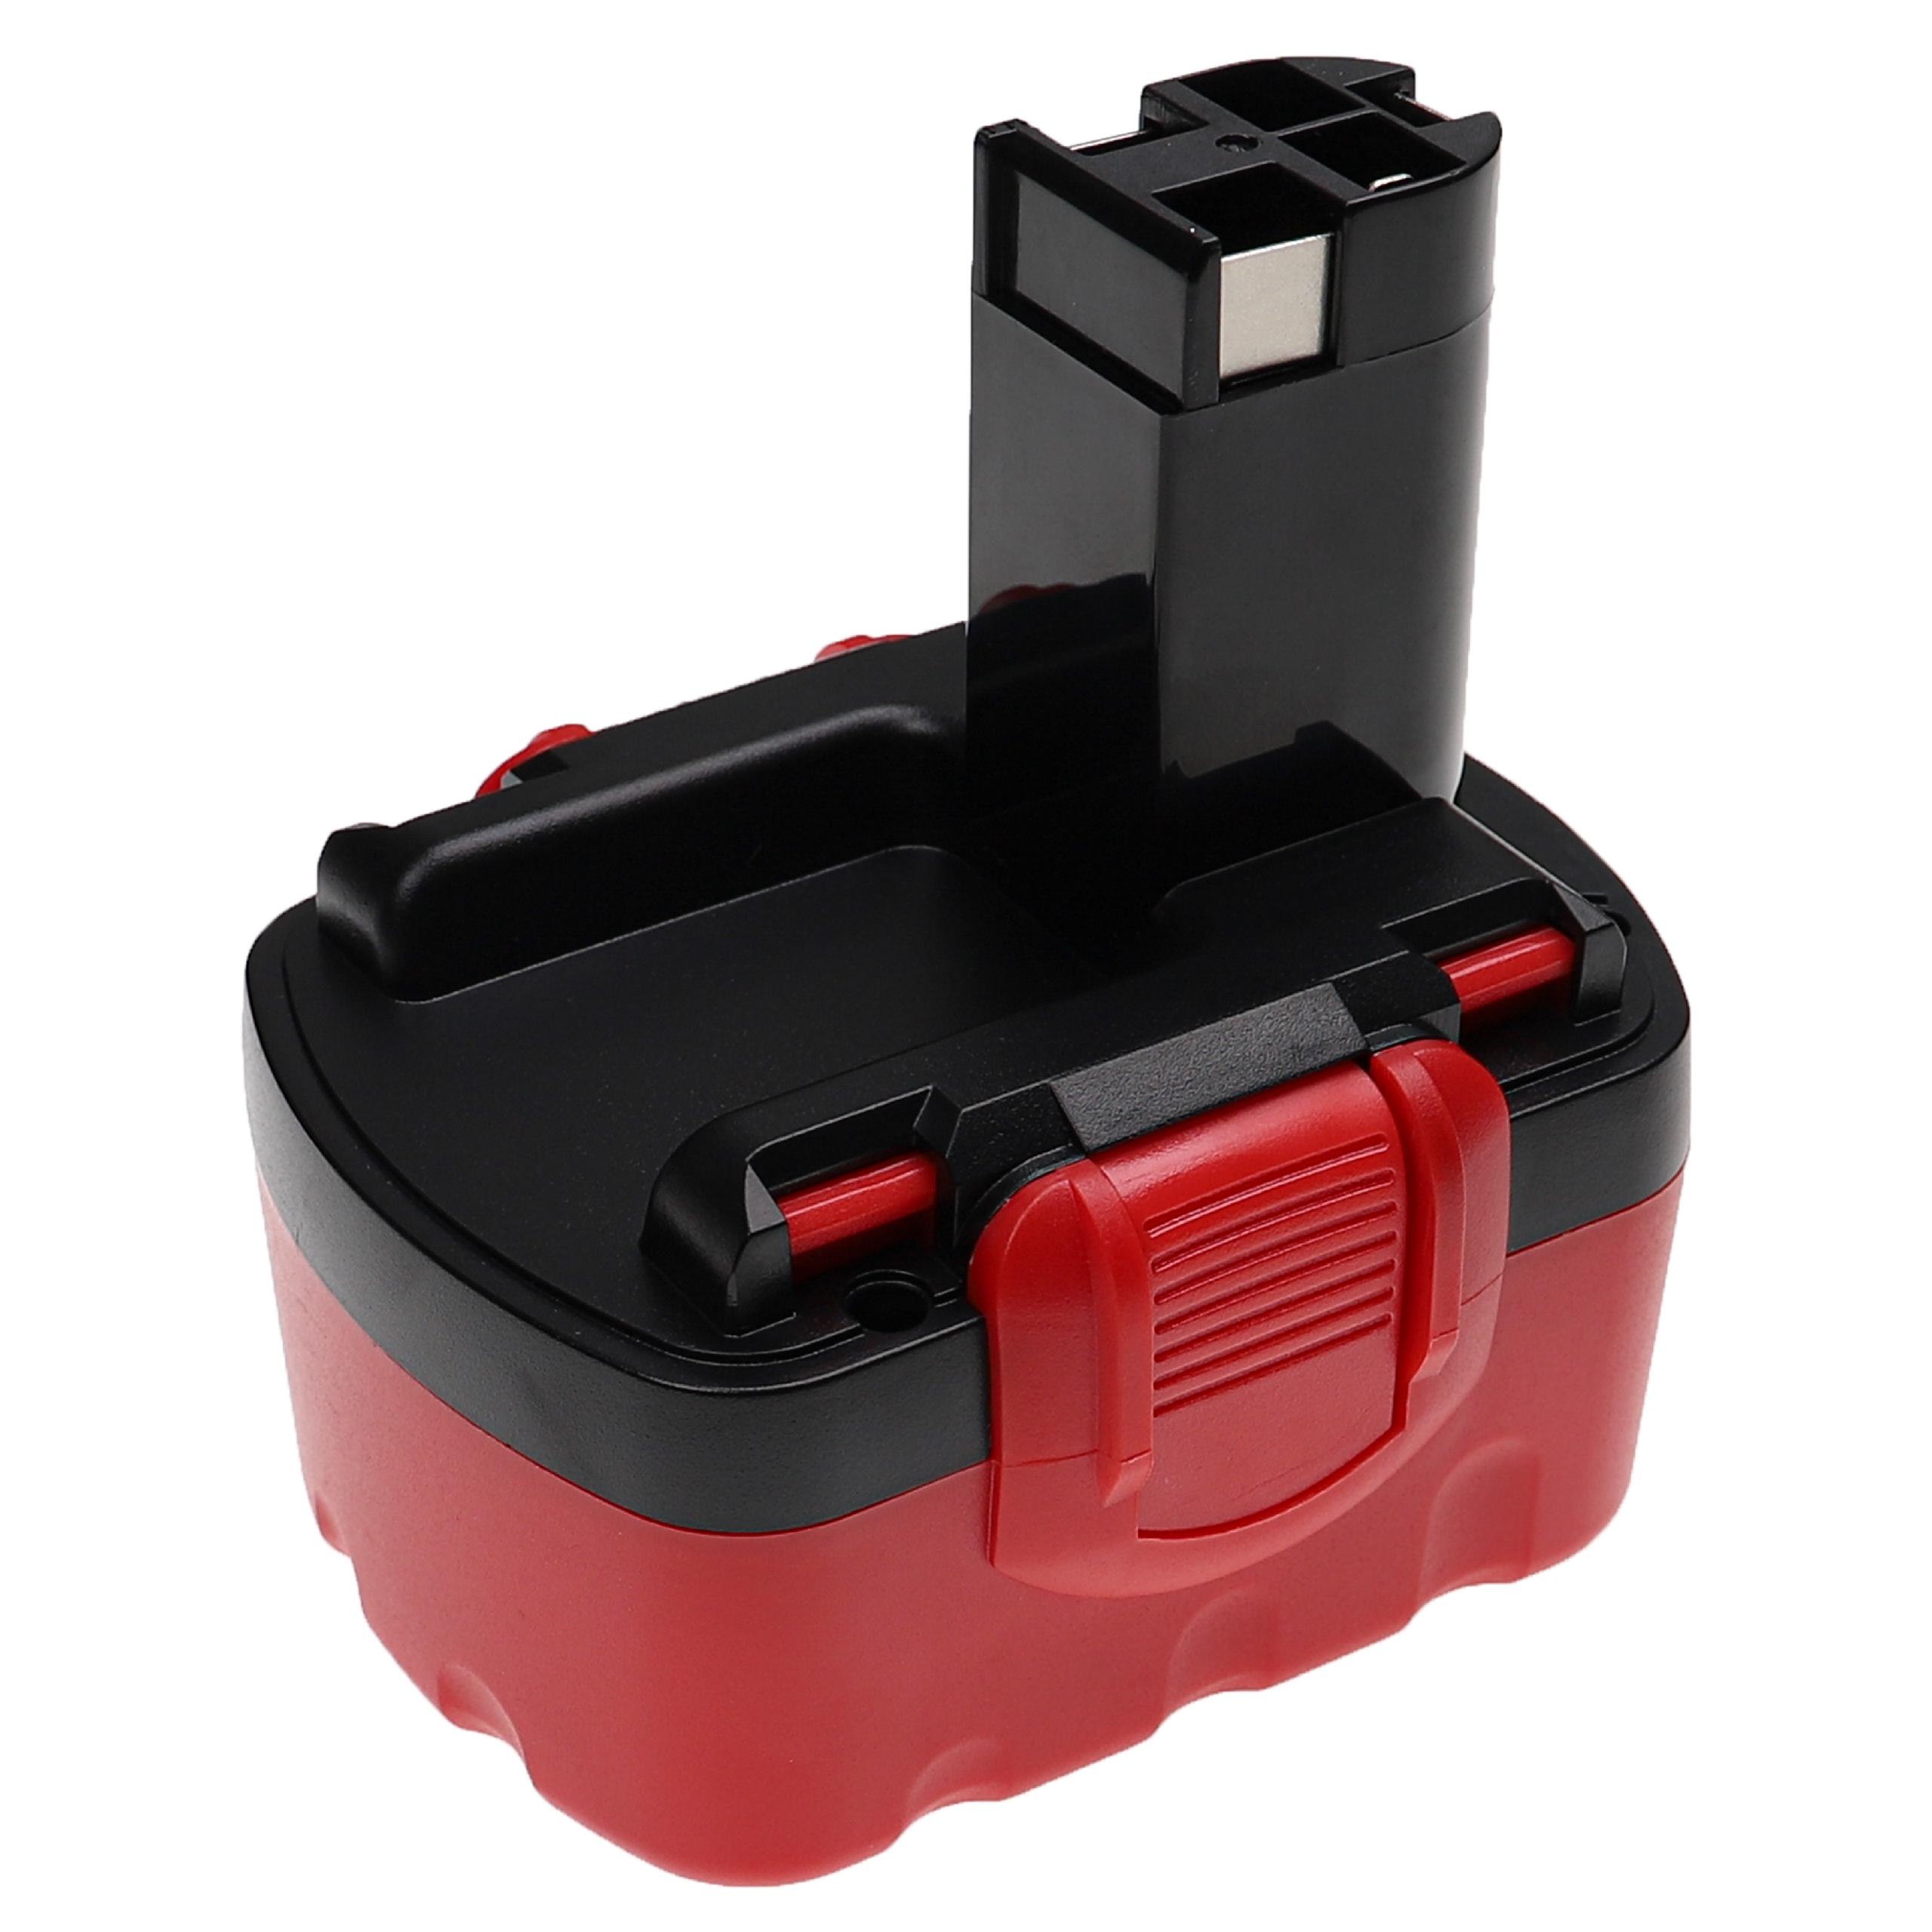 Electric Power Tool Battery Replaces Bosch 2 607 335 264, 2 607 335 263, 1617S0004W - 3300 mAh, 14.4 V, NiMH